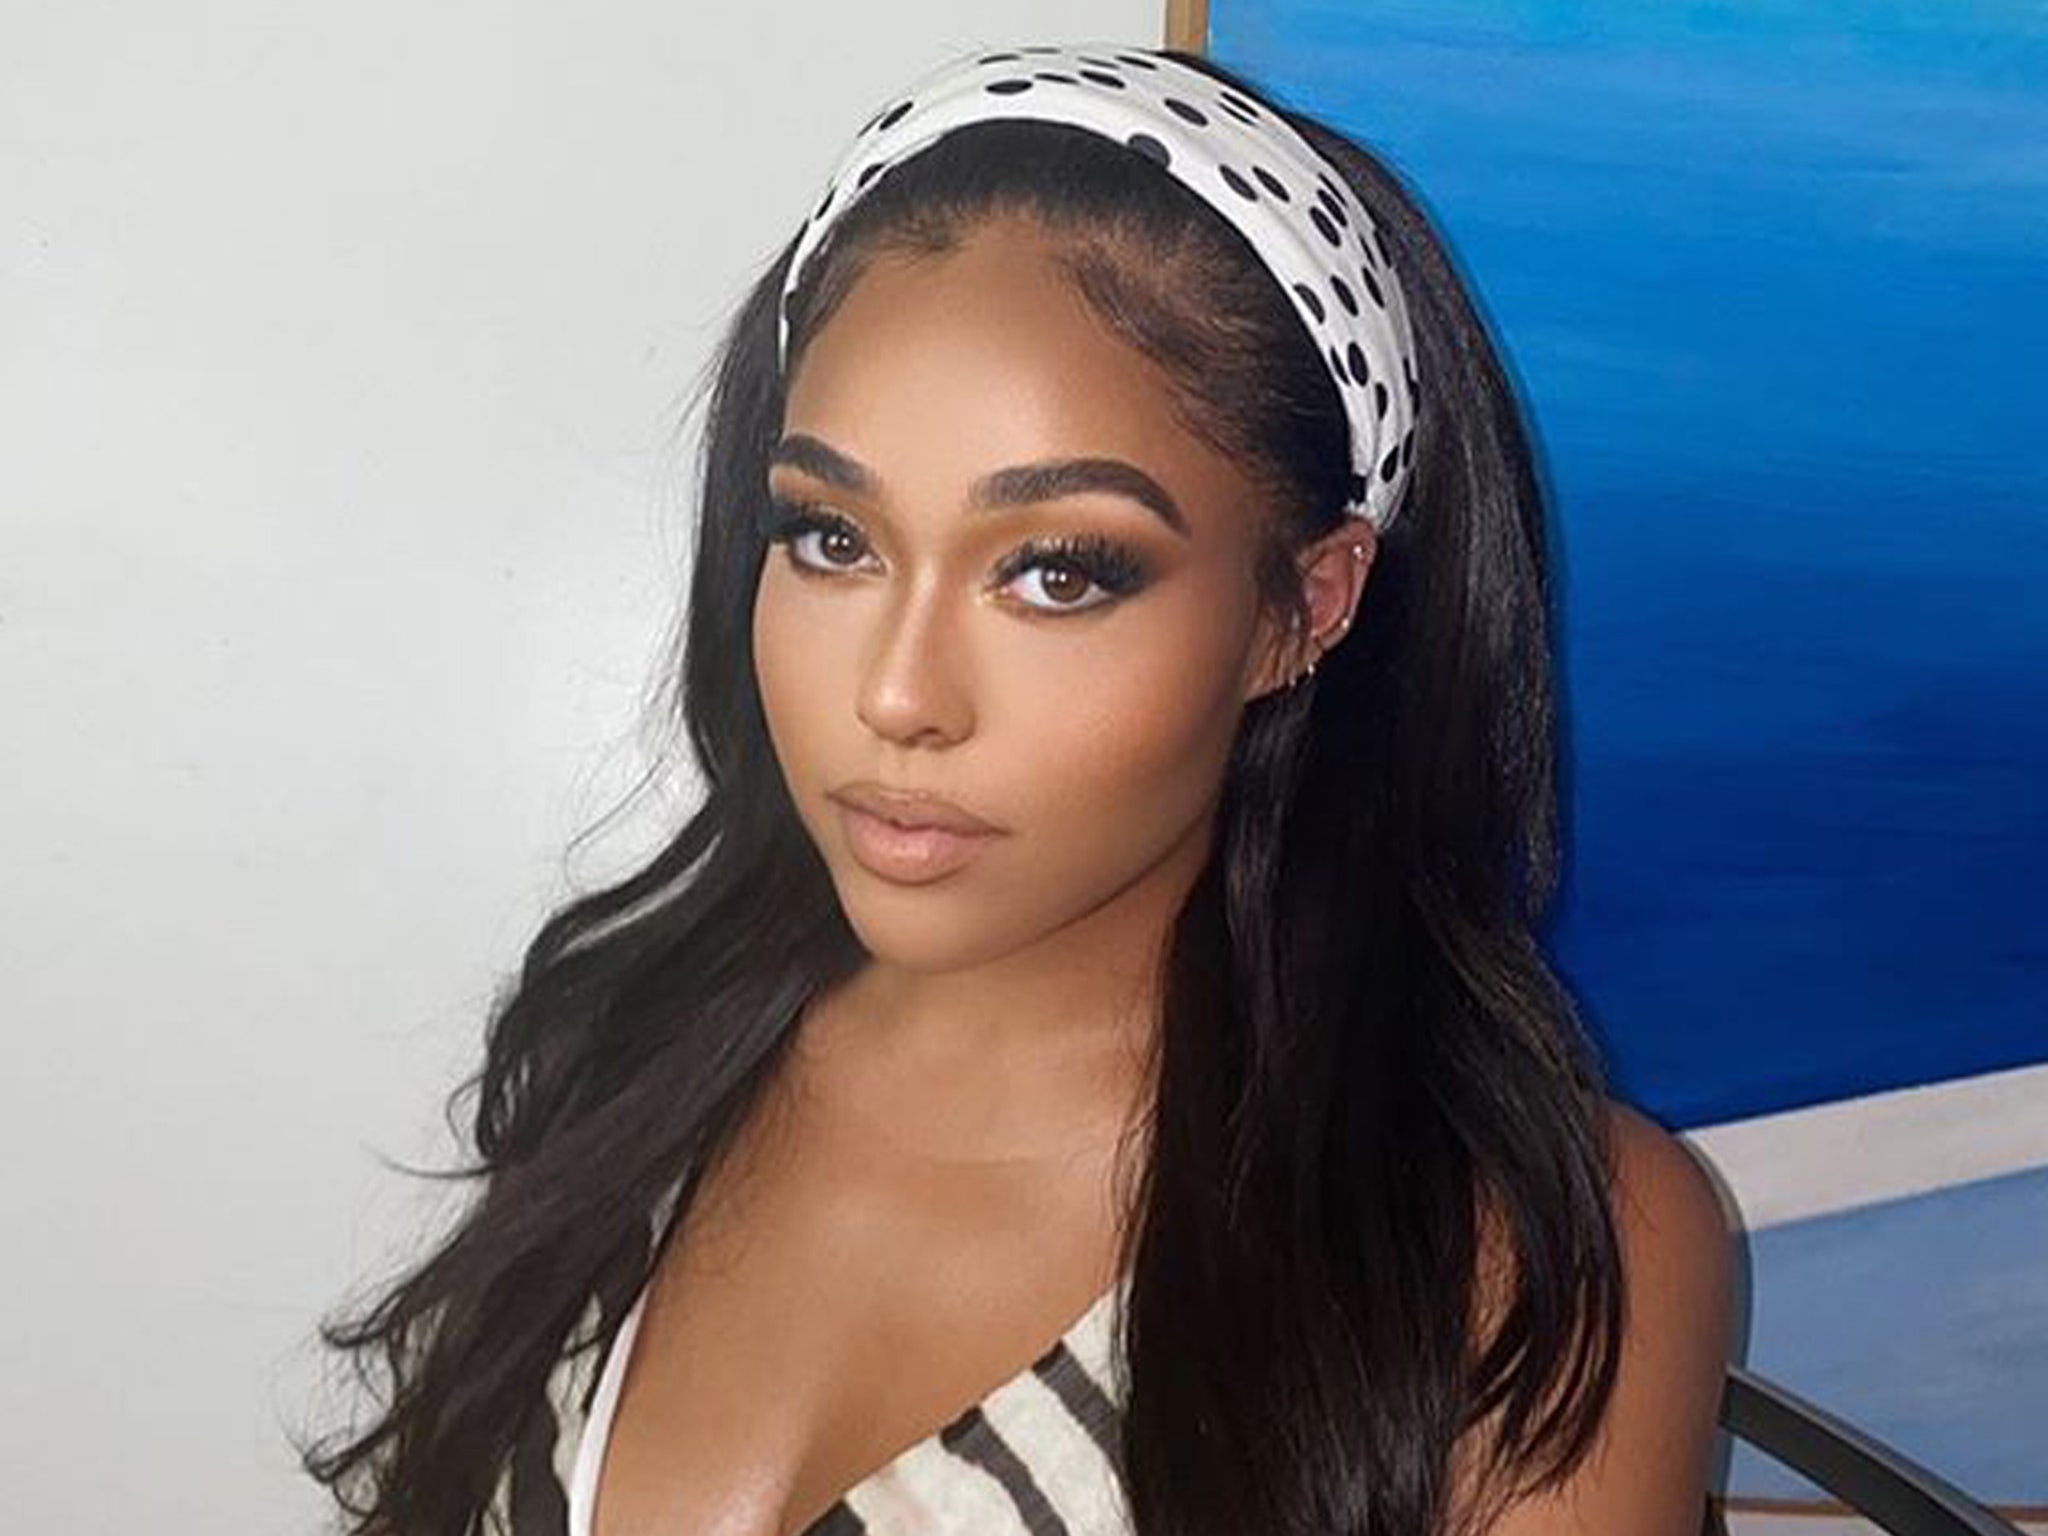 Jordyn Woods' fans go wild over image with her sister and mother